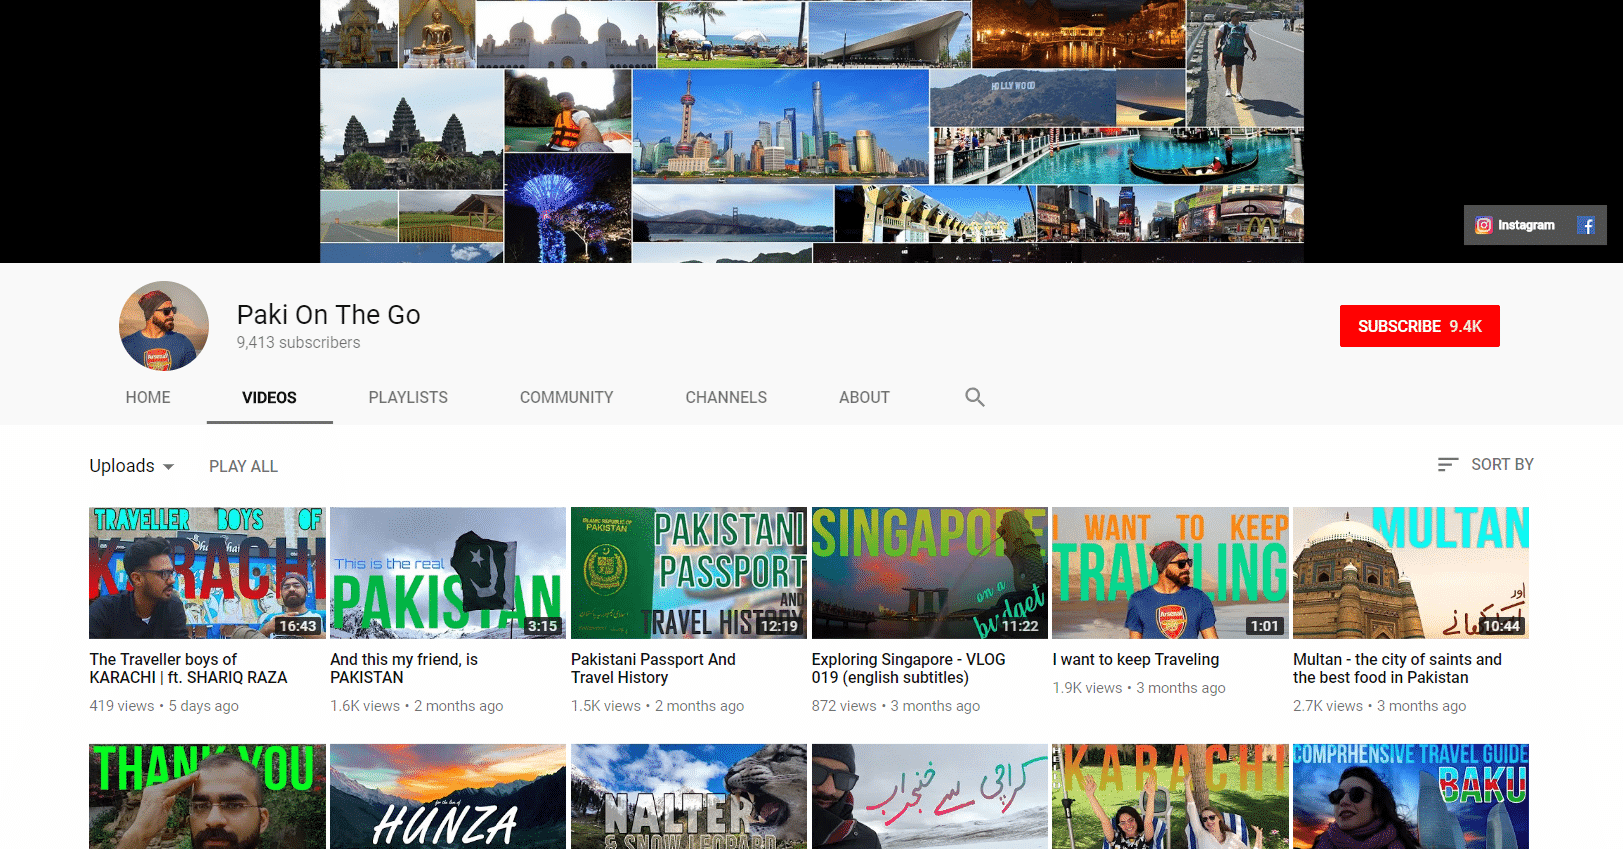 Paki on the go - Youtube Channel